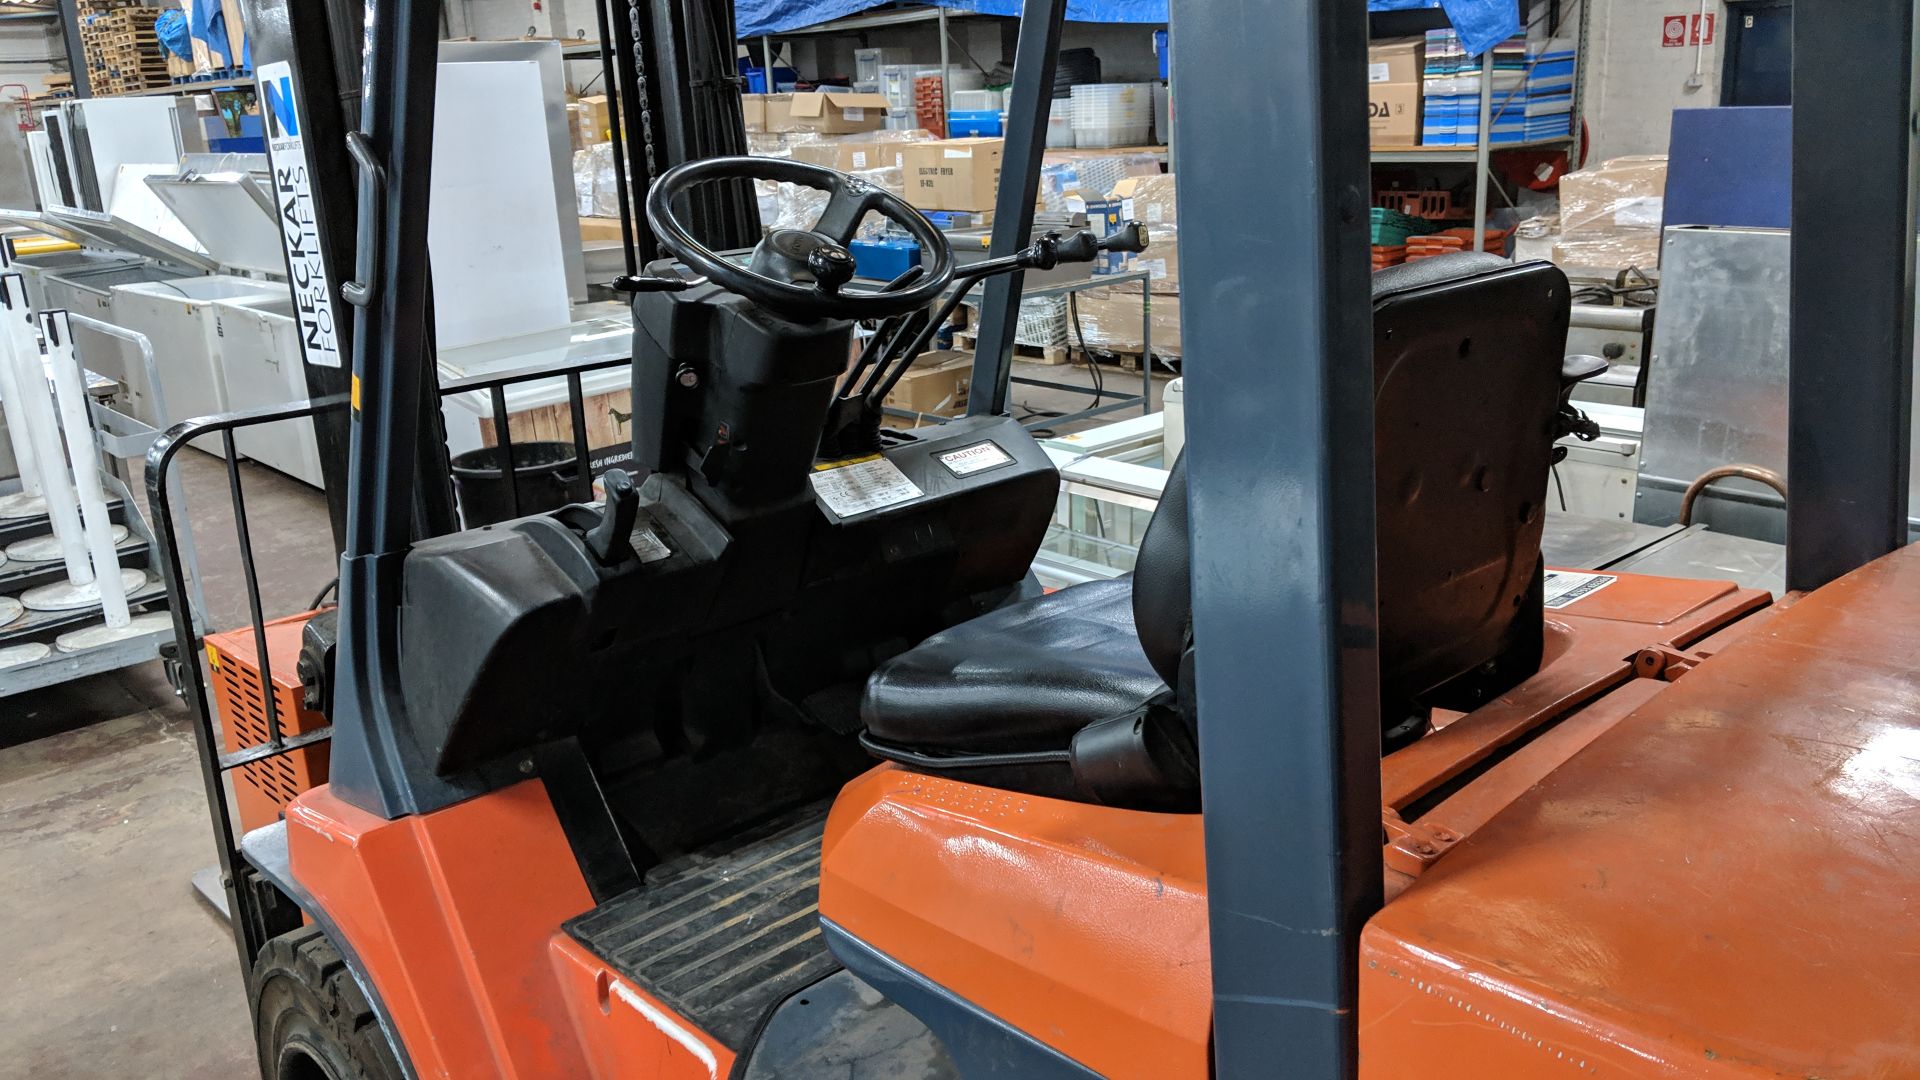 2005 Toyota electric forklift truck model 7FB30 with Cascade sideshift - Image 8 of 13